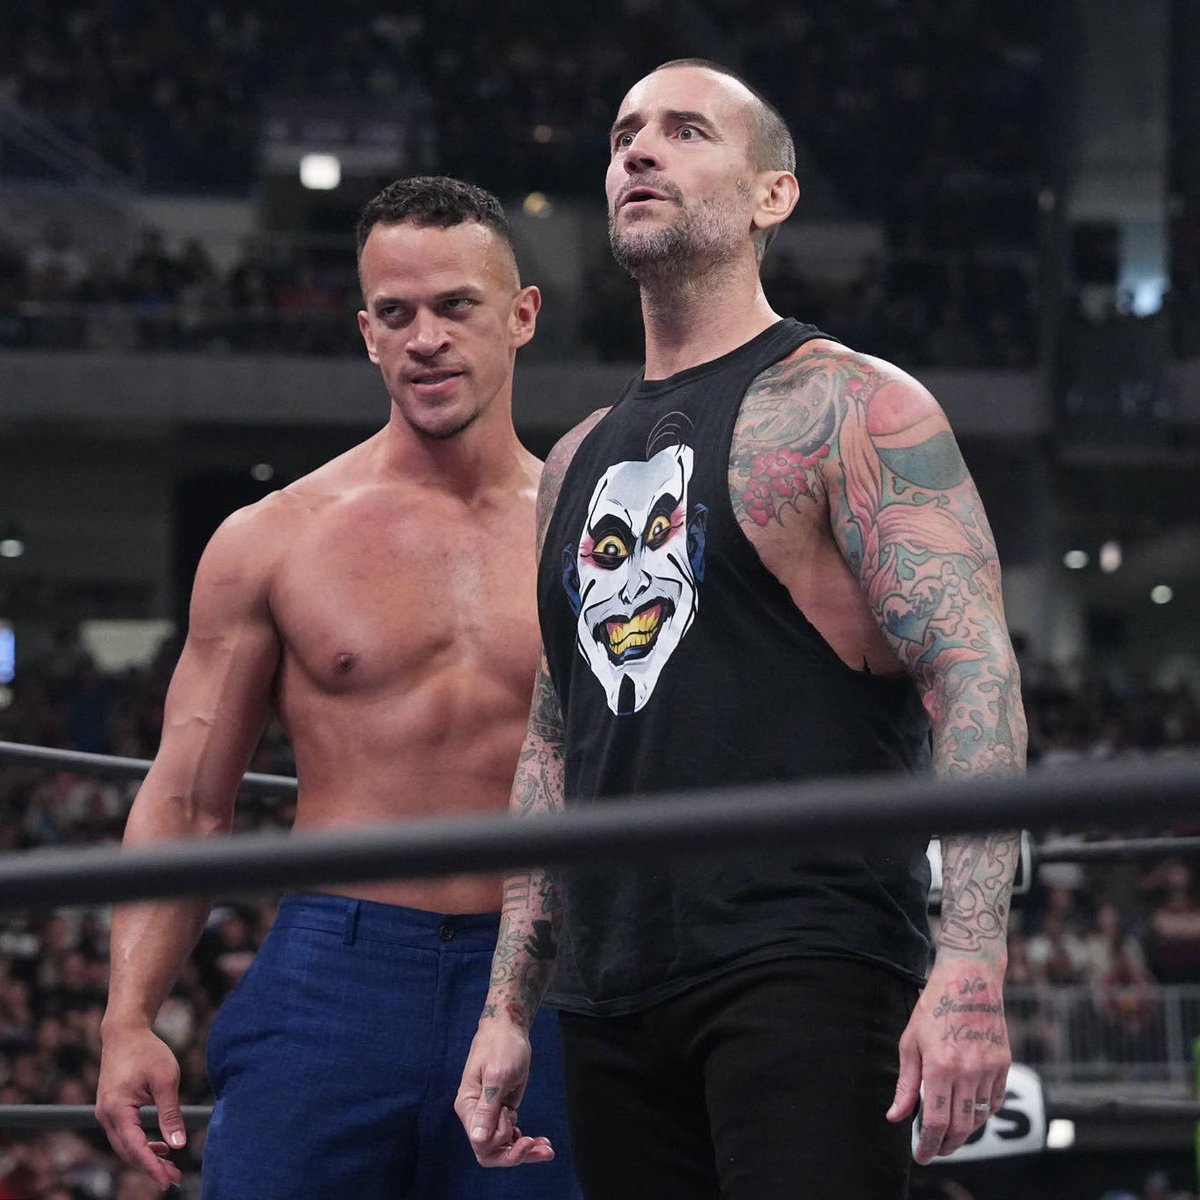 “I have no issues with Punk, I don’t give a fuck what anybody tries to tell me, I don’t care. He has never done me wrong and you can have your opinions on him, but you shouldn’t vilify someone for thinking differently than you.”

-Ricky Starks via WhatCulture Wrestling